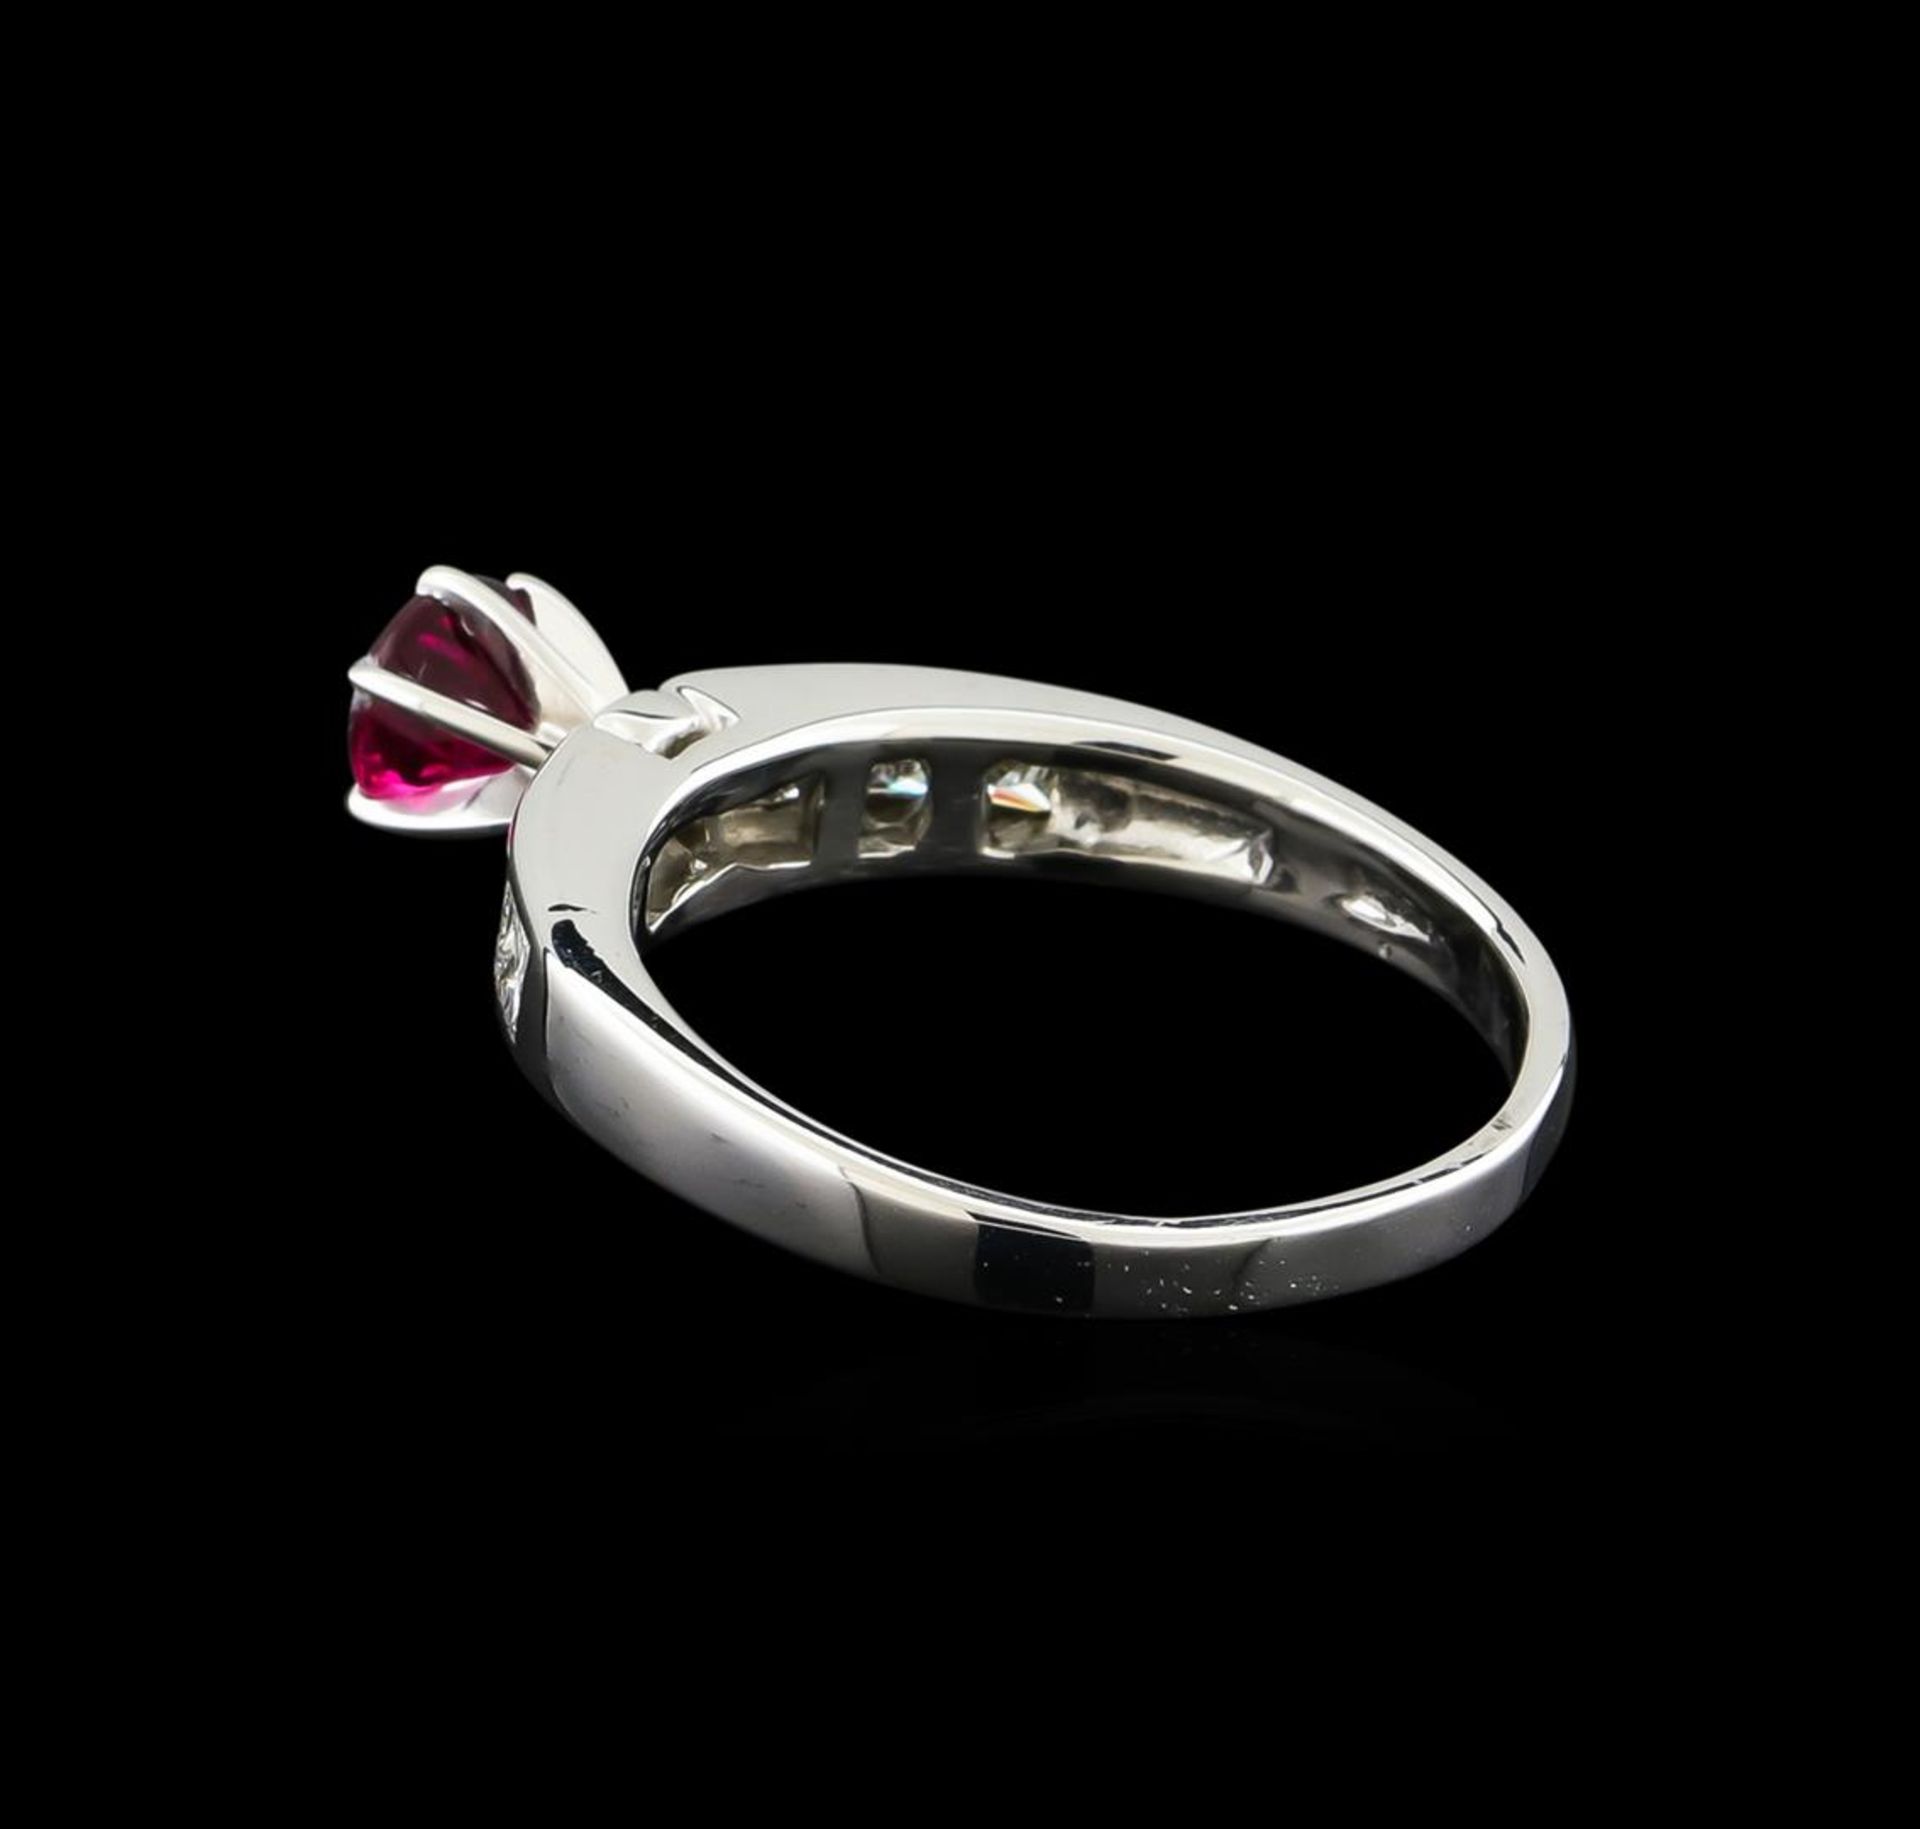 0.75 ctw Pink Tourmaline and Diamond Ring - 14KT White Gold - Image 3 of 5